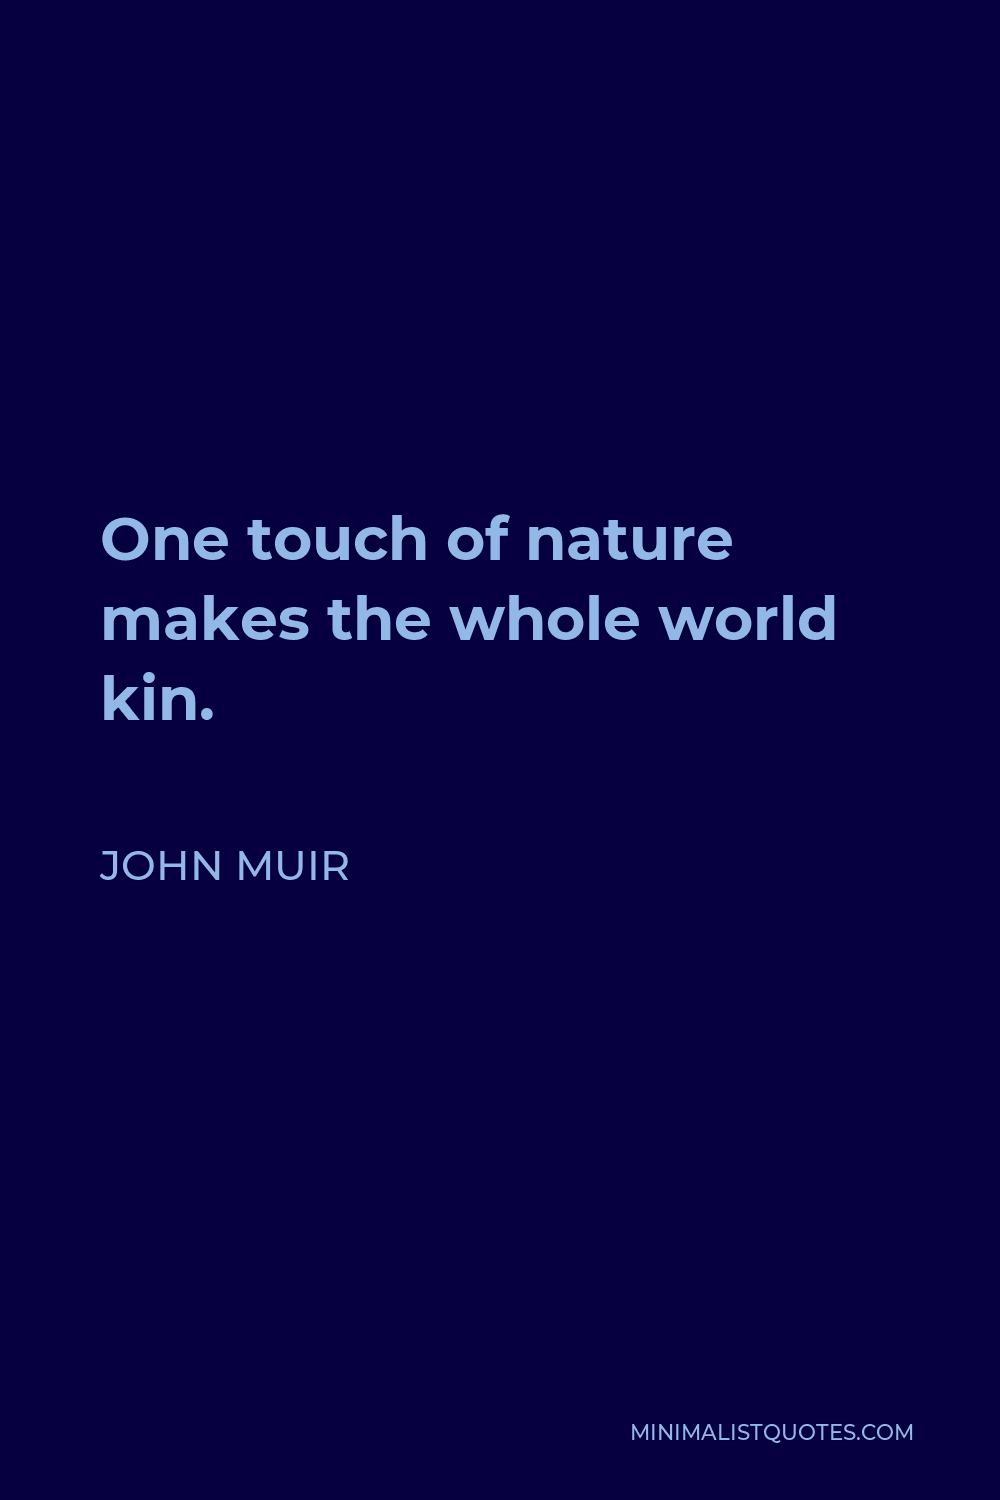 John Muir Quote - One touch of nature makes the whole world kin.